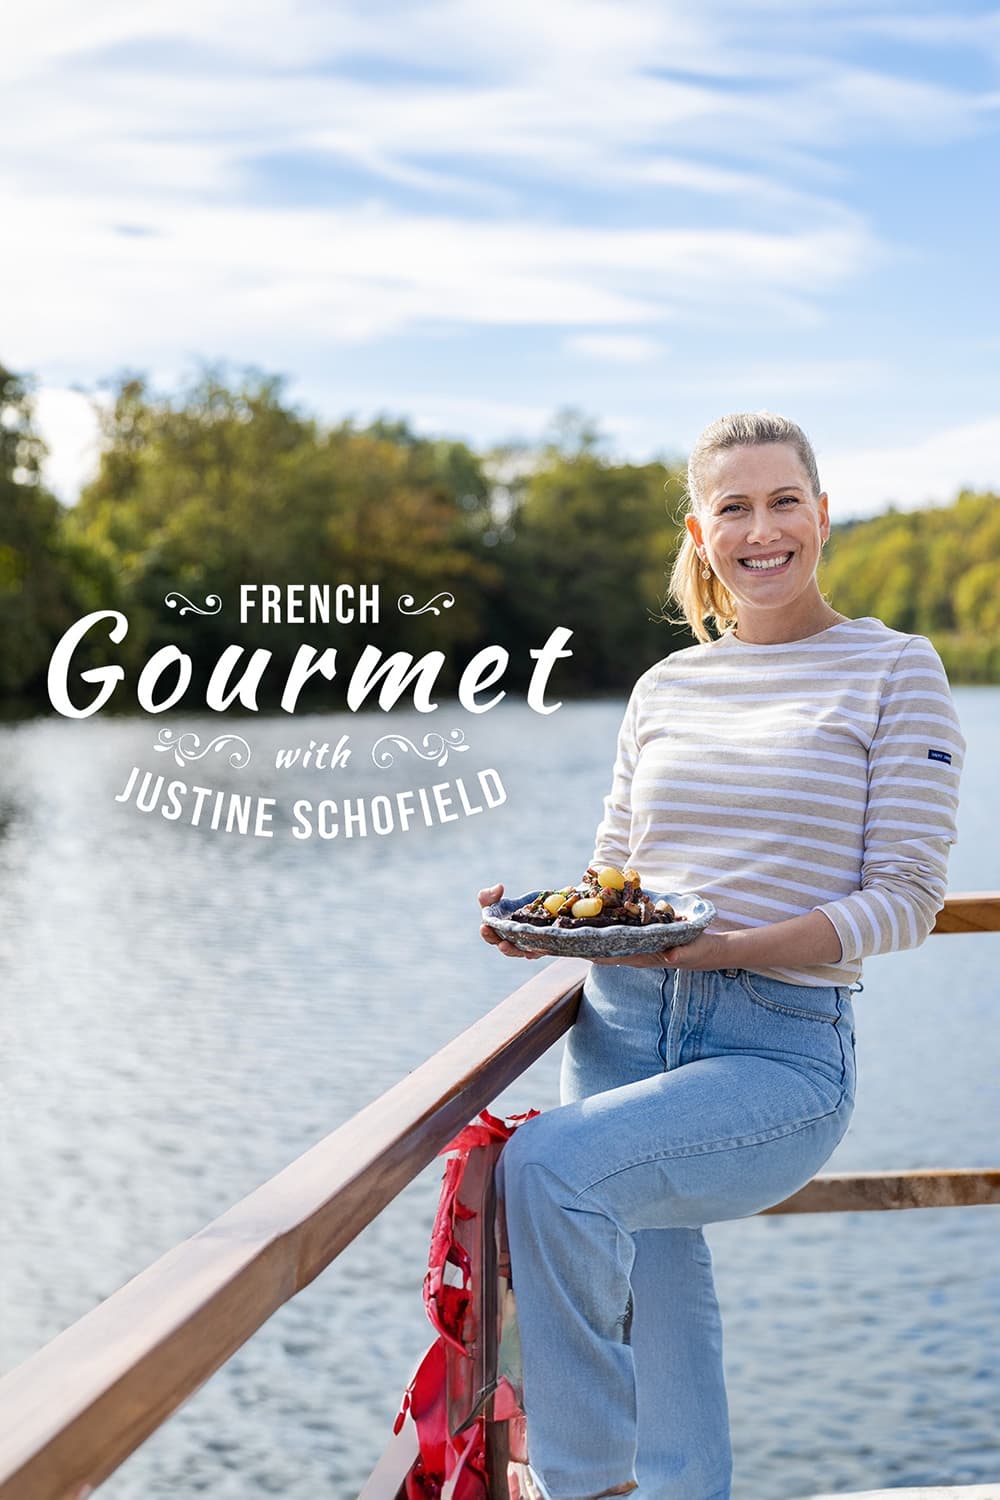 French Gourmet with Justine Schofield